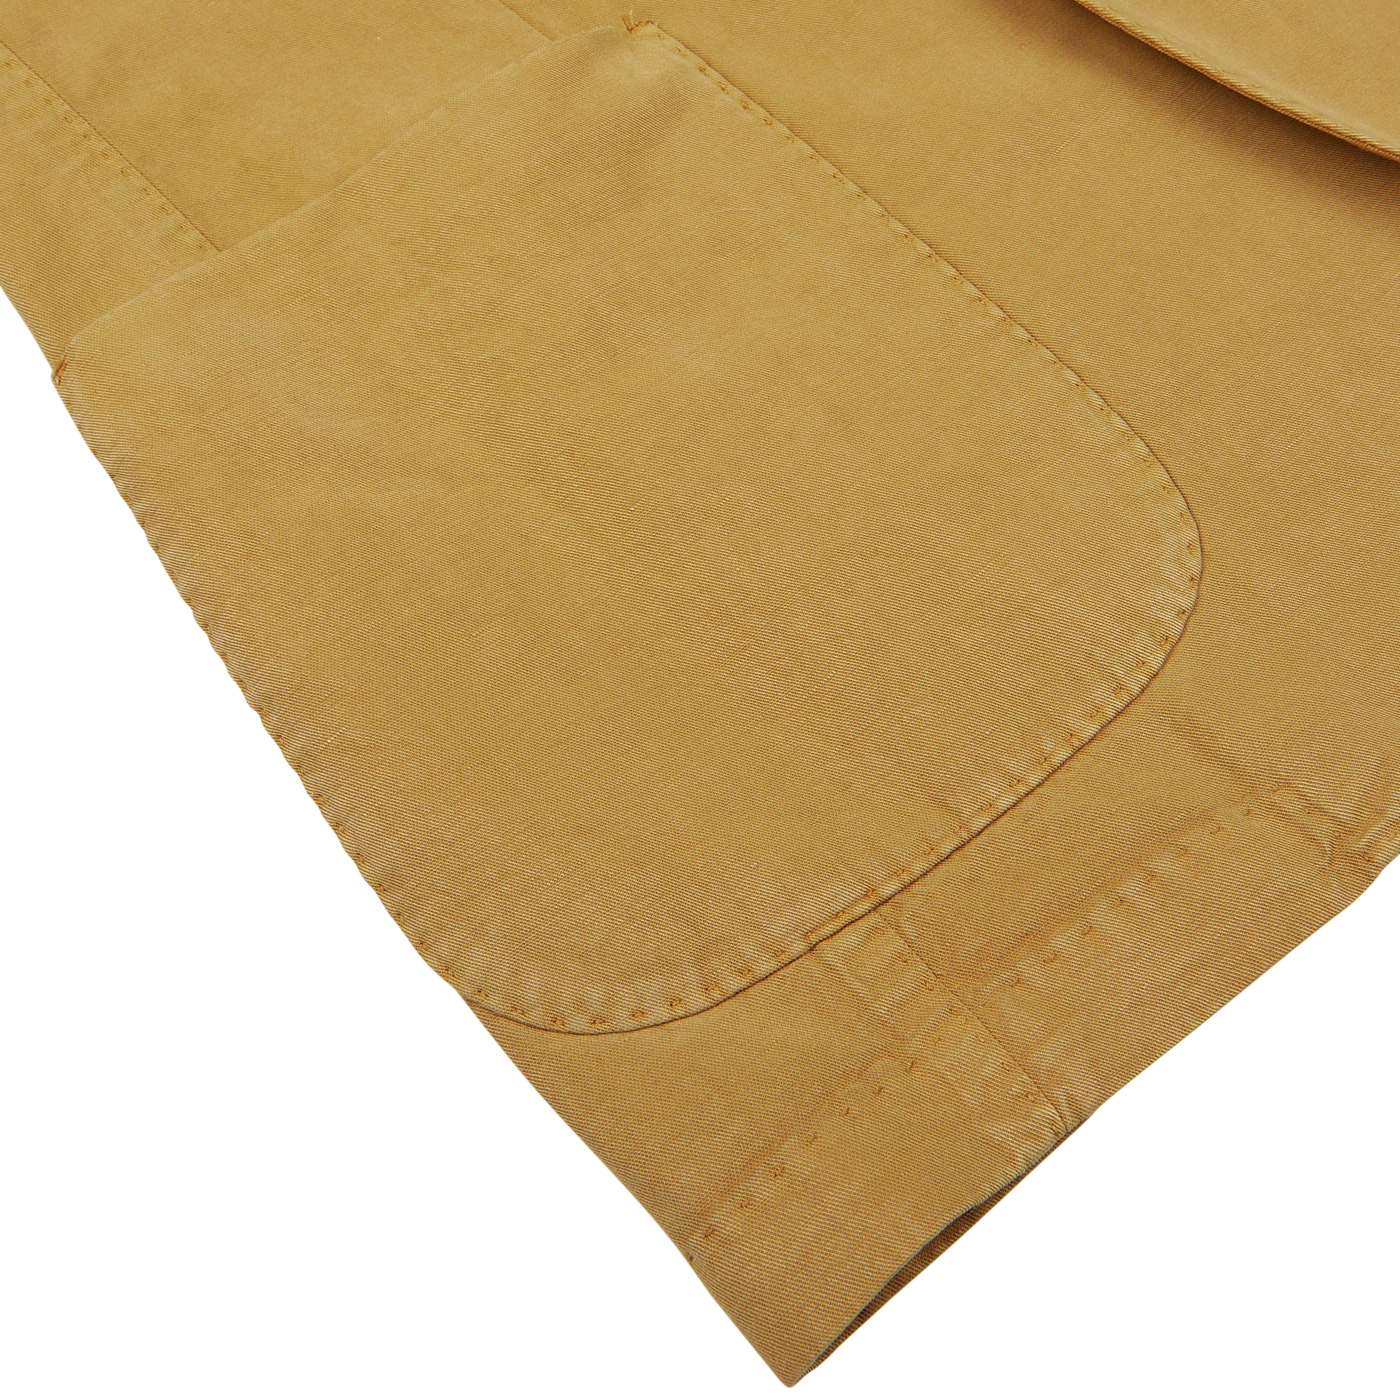 Close-up of a dark beige washed cotton-linen L.B.M. 1911 blazer fabric with visible stitching and pocket detail.